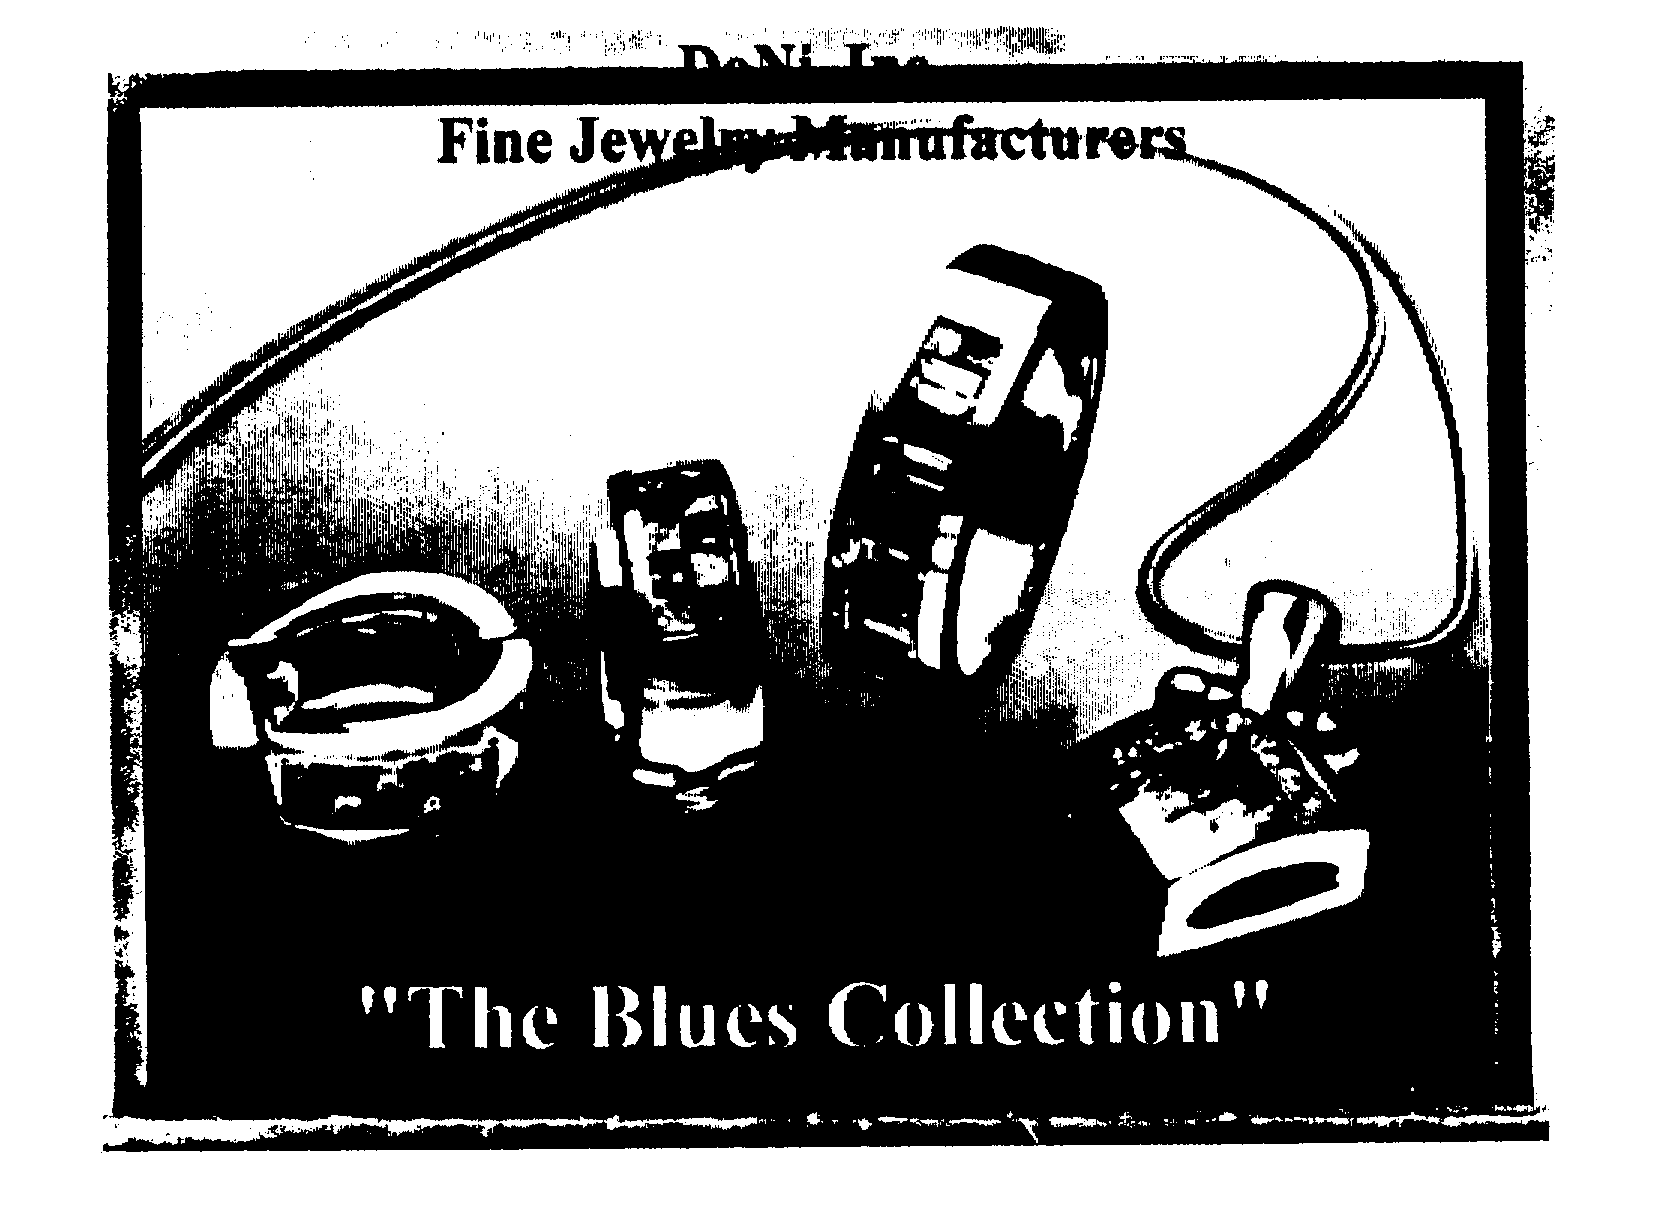 Trademark Logo DONI, INC. FINE JEWELRY MANUFACTURERS "THE BLUES COLLECTION"